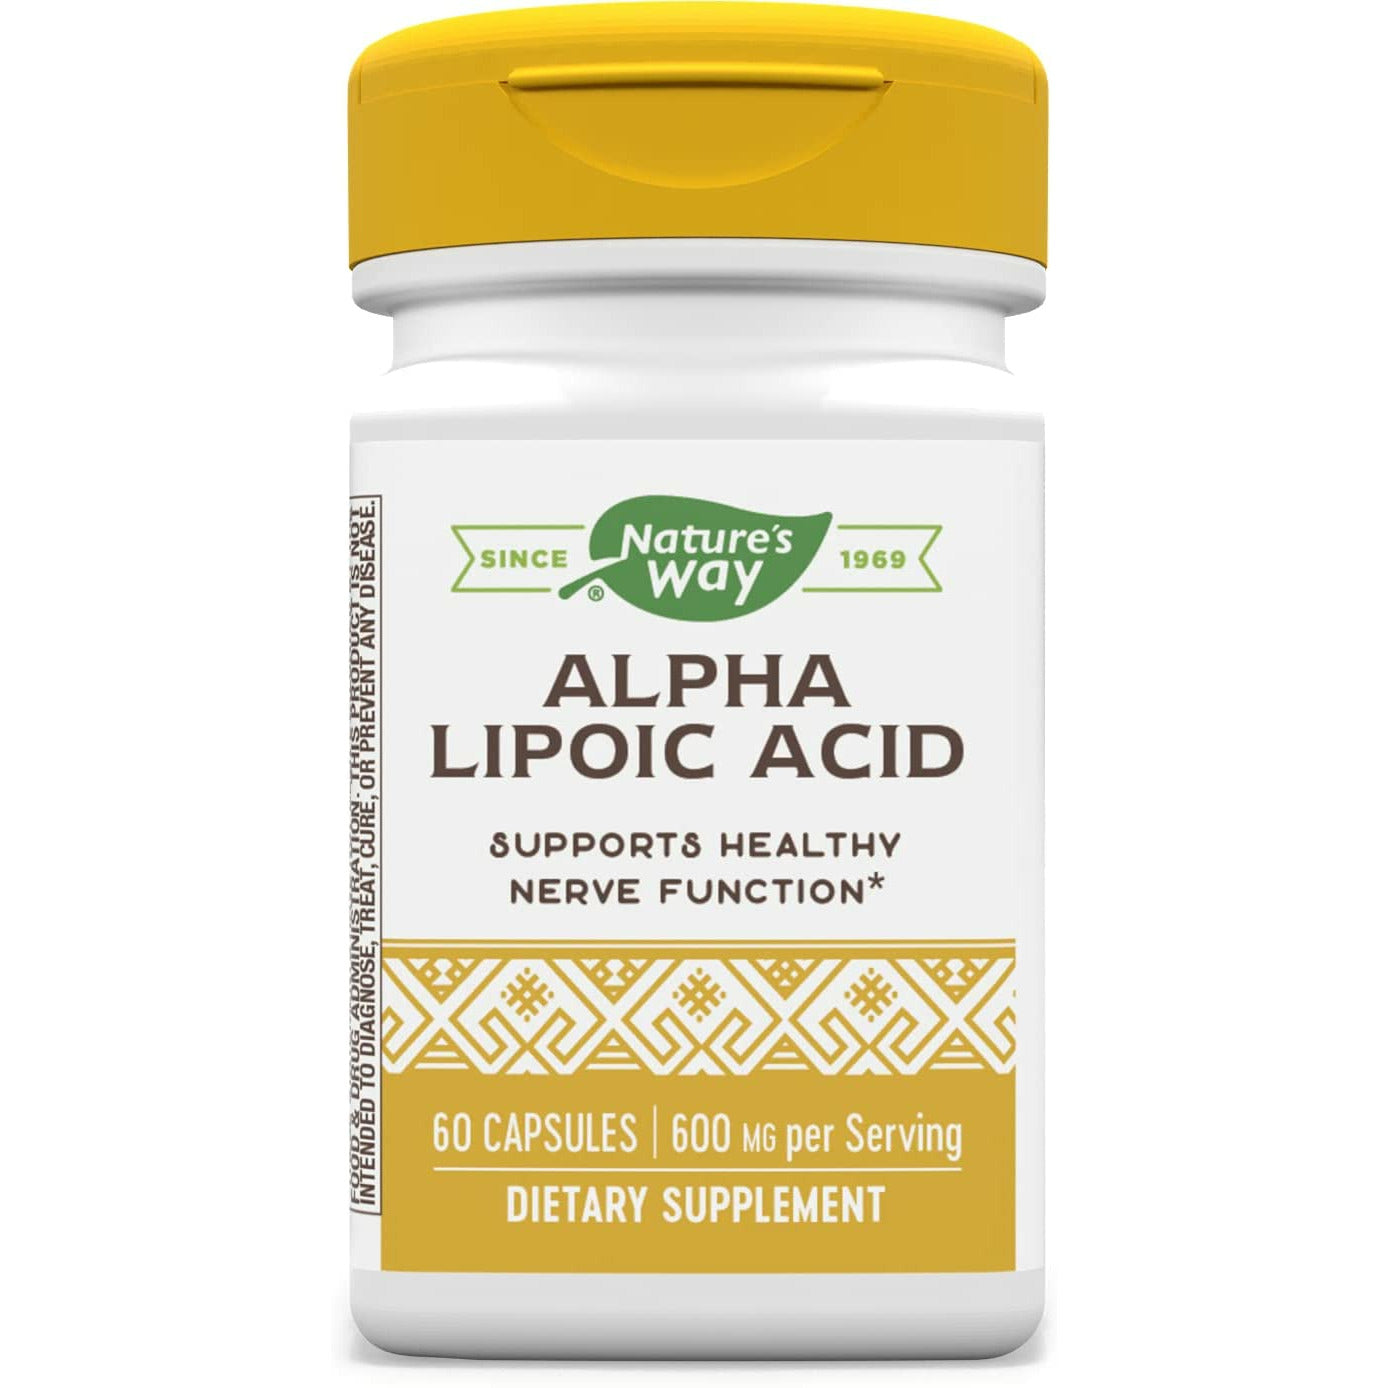 Nature's Way Alpha Lipoic Acid, Supports Healthy Nerve Function*